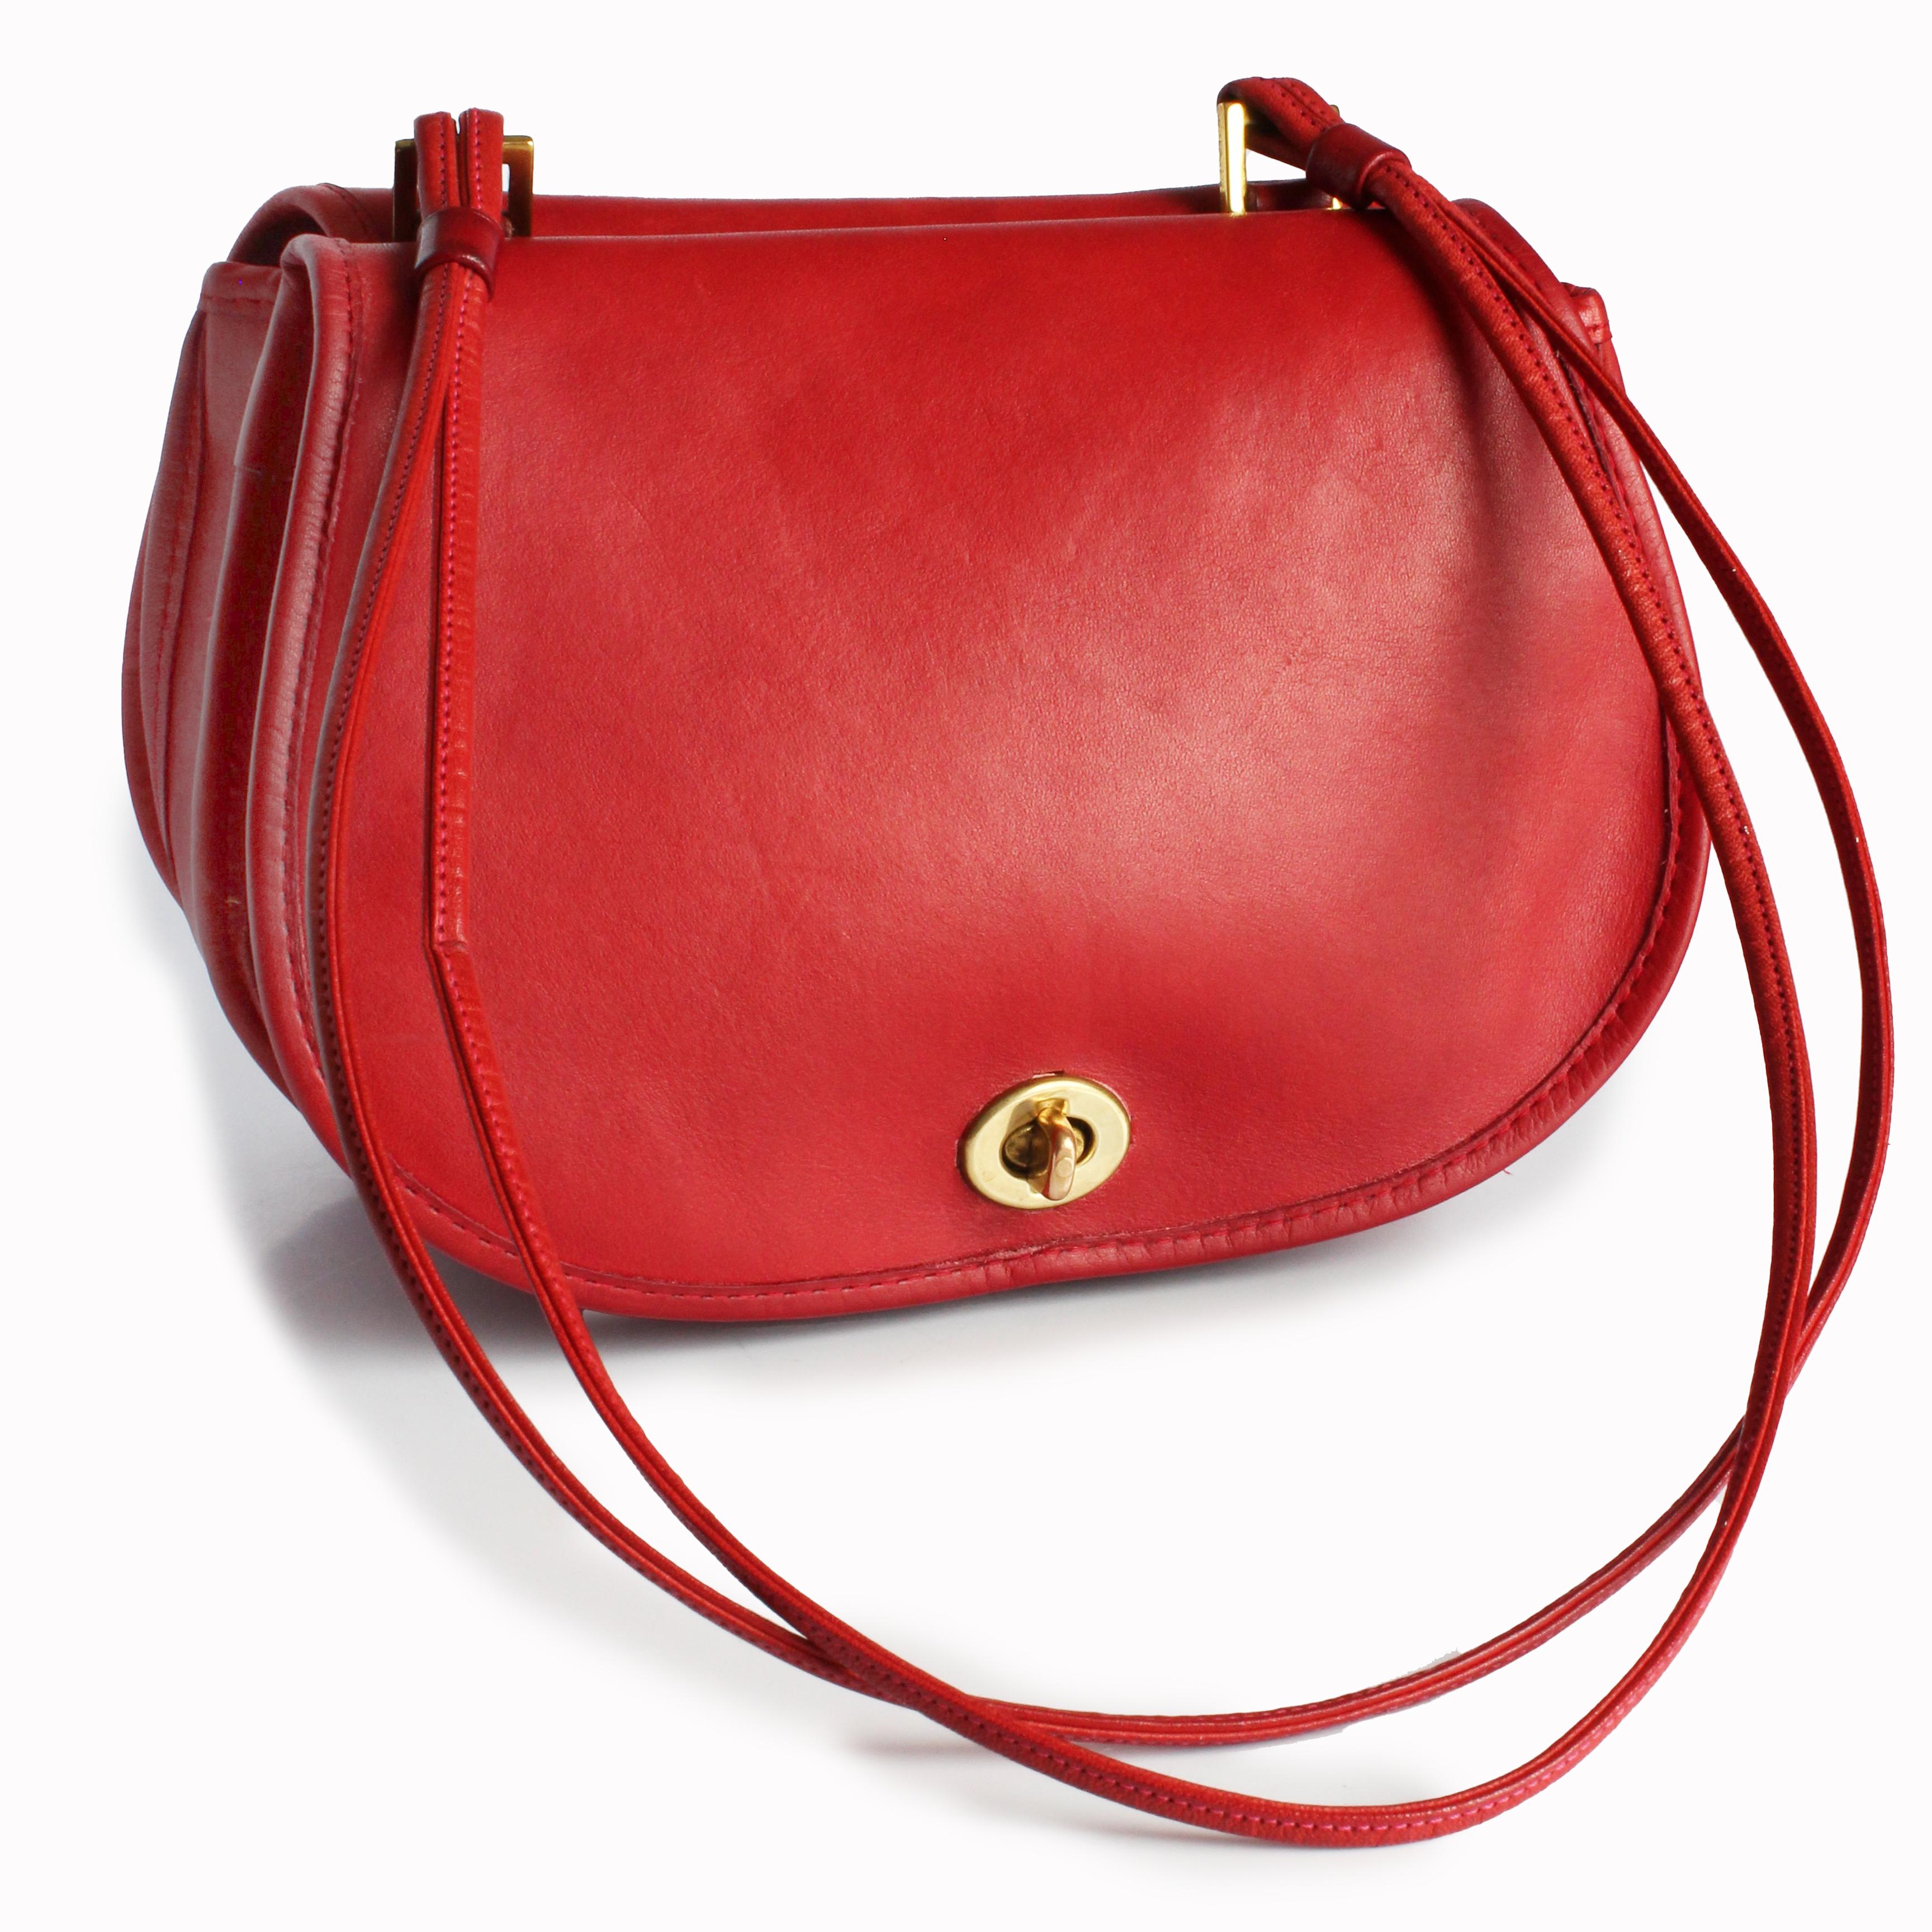 Preowned, vintage Bonnie Cashin for Coach '2-in-1 Pouch' shoulder bag, released between 1972-1973.  A unicorn, especially in this color!  Made from a wonderfully patina'd red leather, it features turn lock pouches on each side and a non-adjustable,